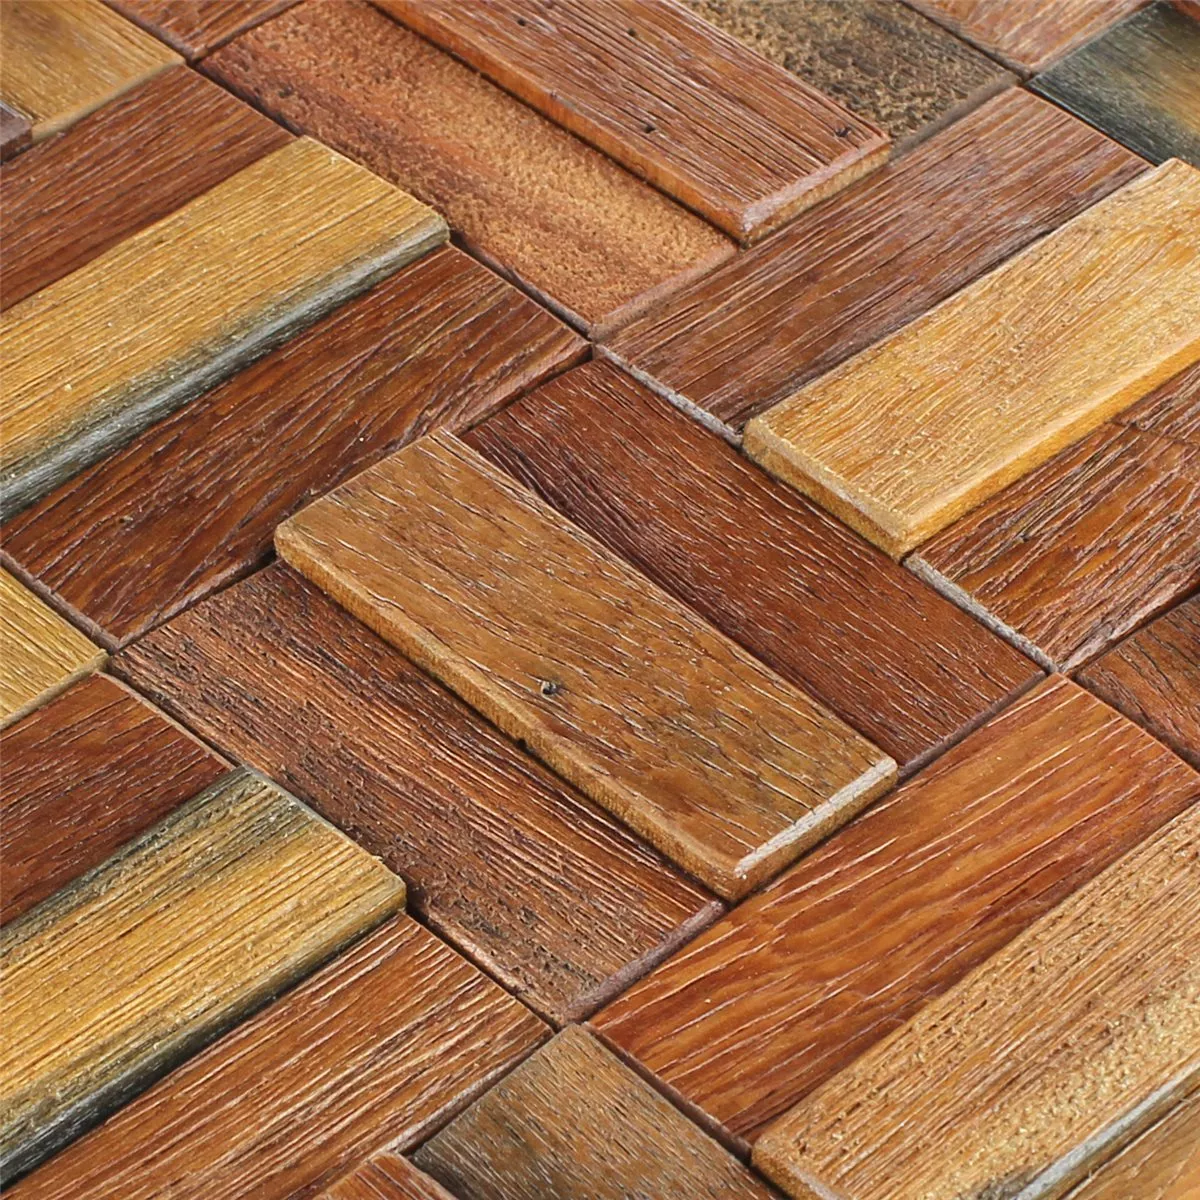 Wood Mosaic Tiles Planks Lacquered